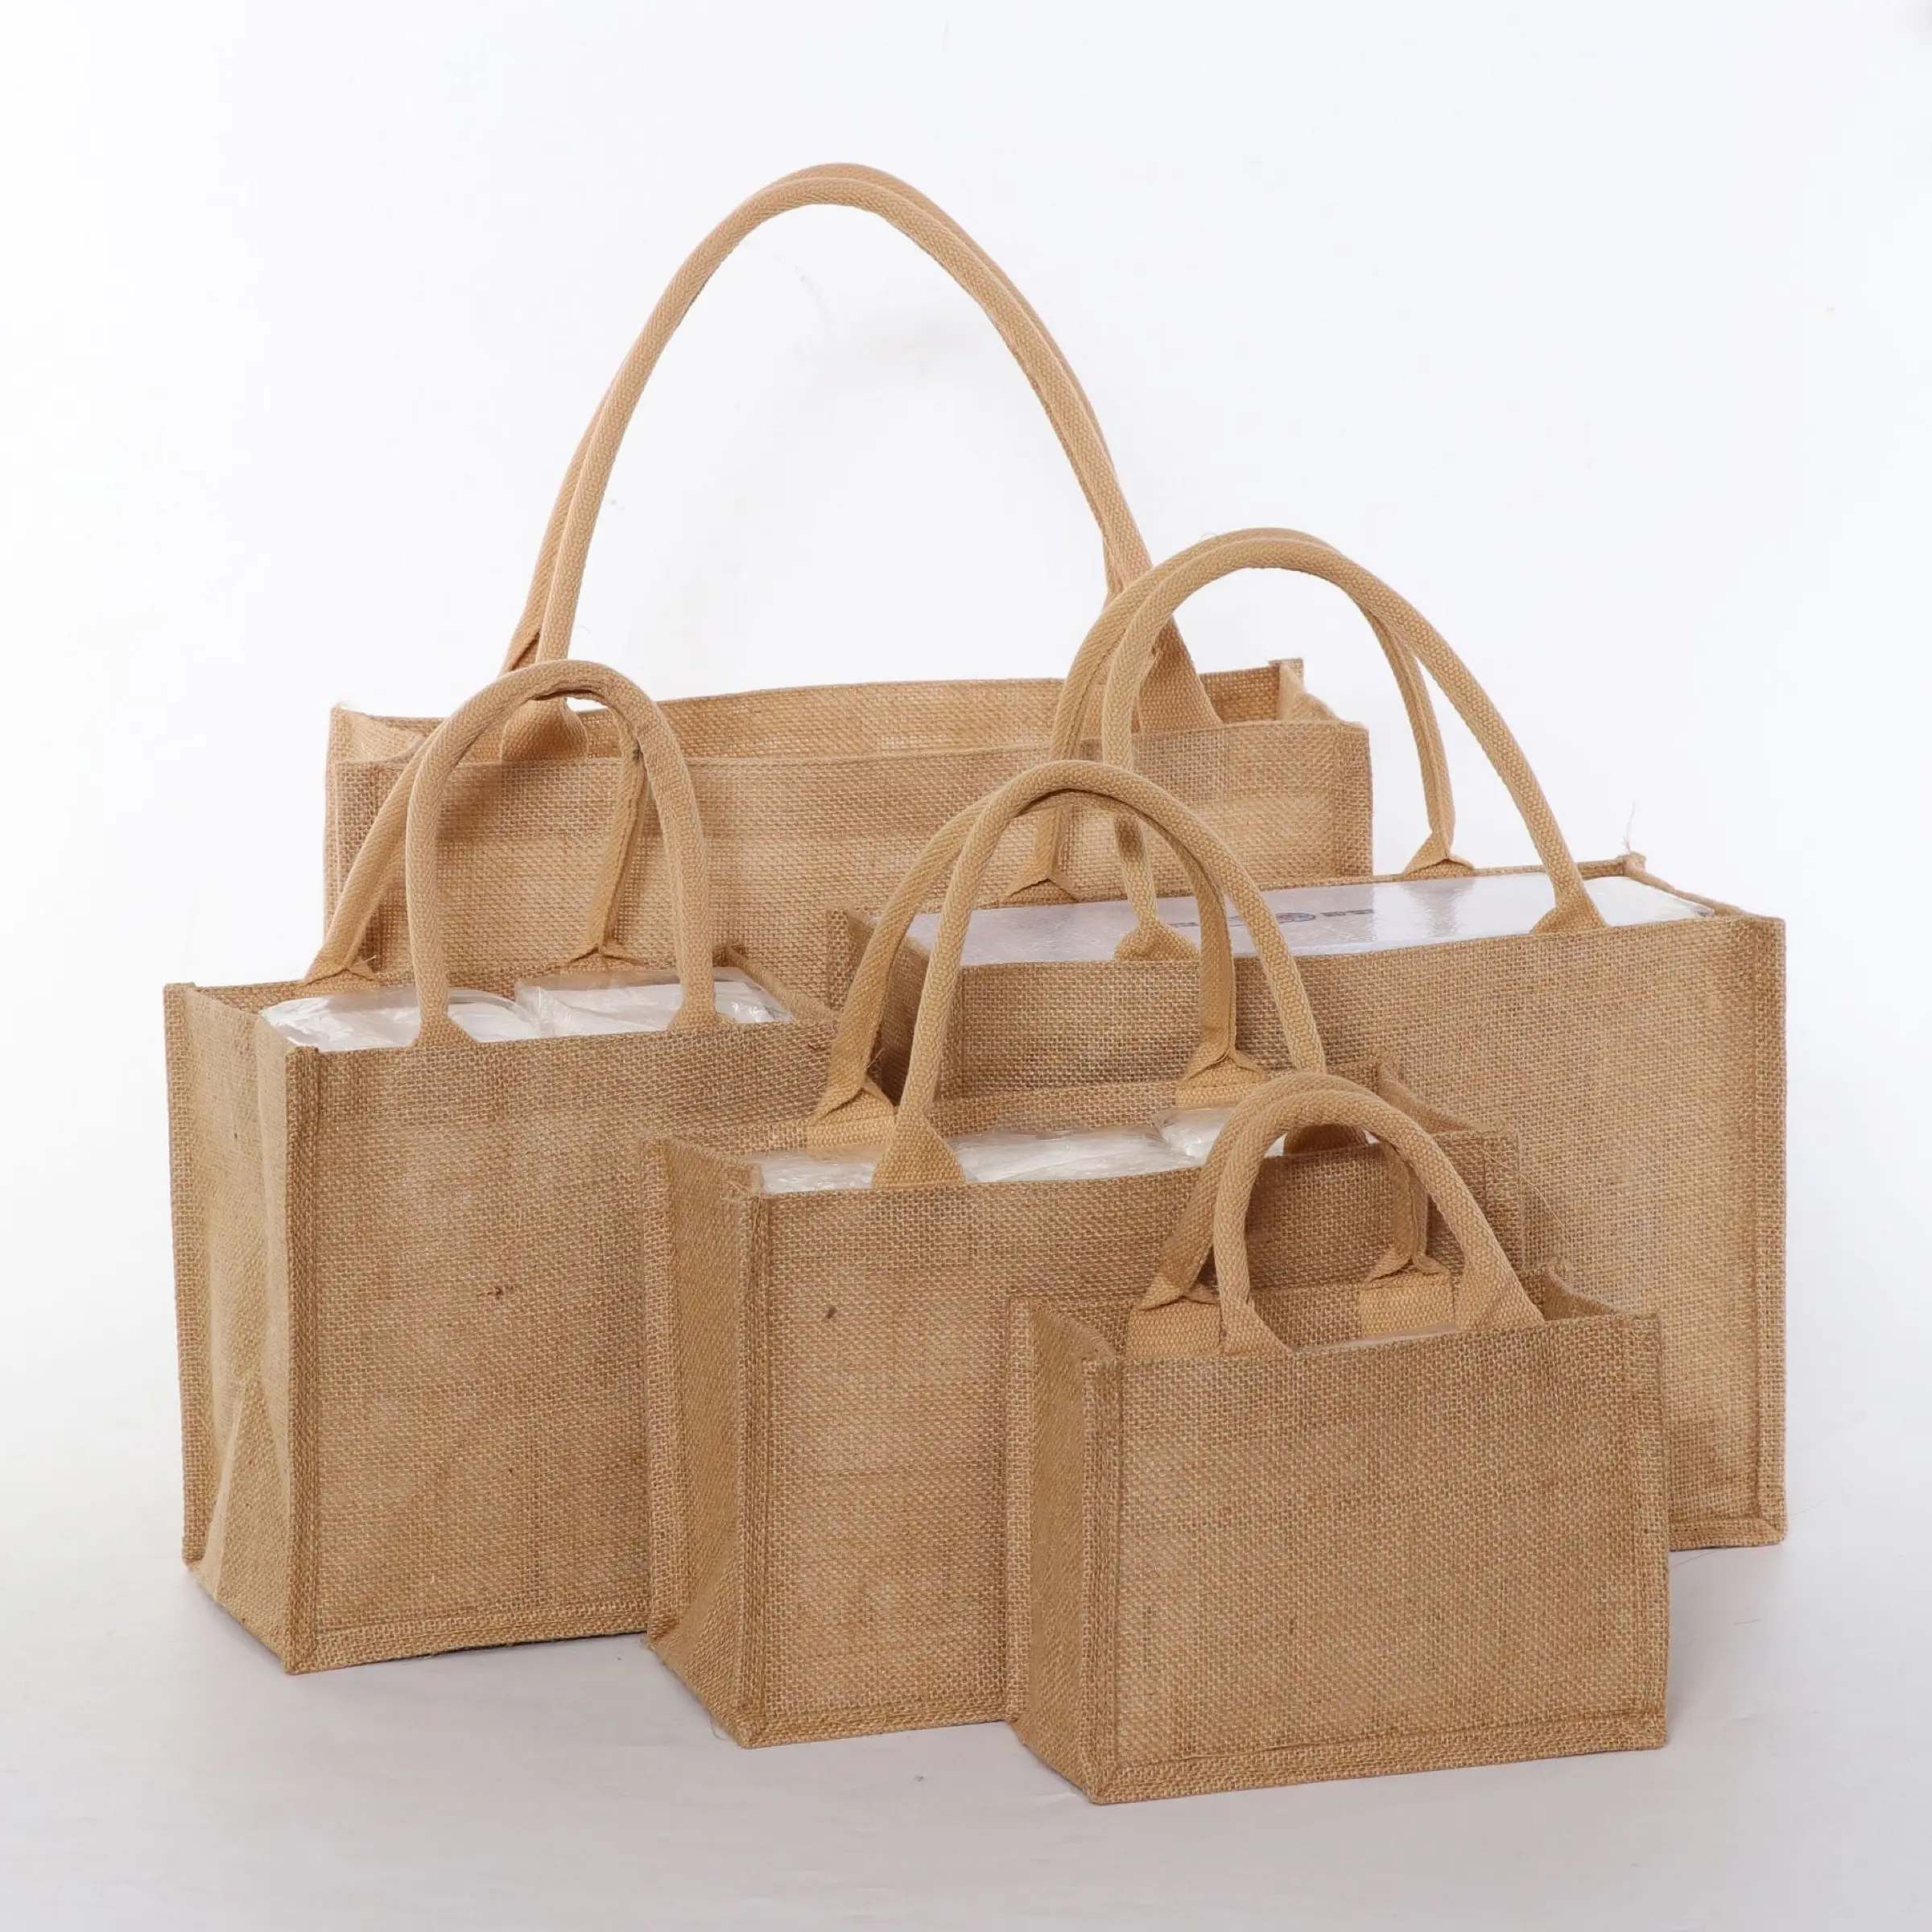 Custom Design Large Jute Burlap Shopping Beach Tote Bag With Soft Cotton Handles For Traveling